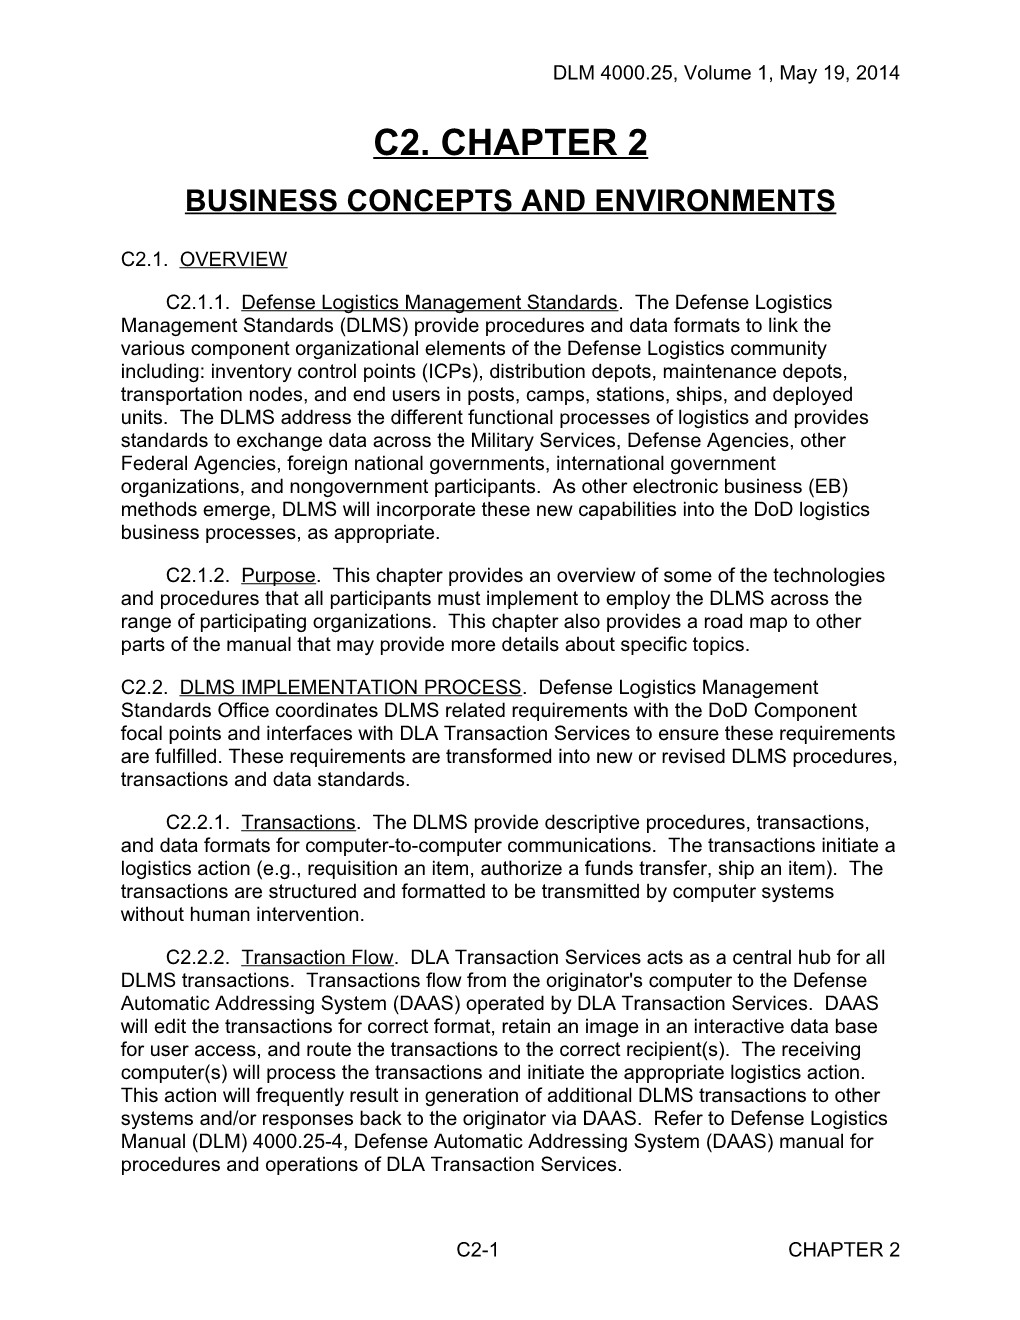 Chapter 2 - Business Concepts and Environments